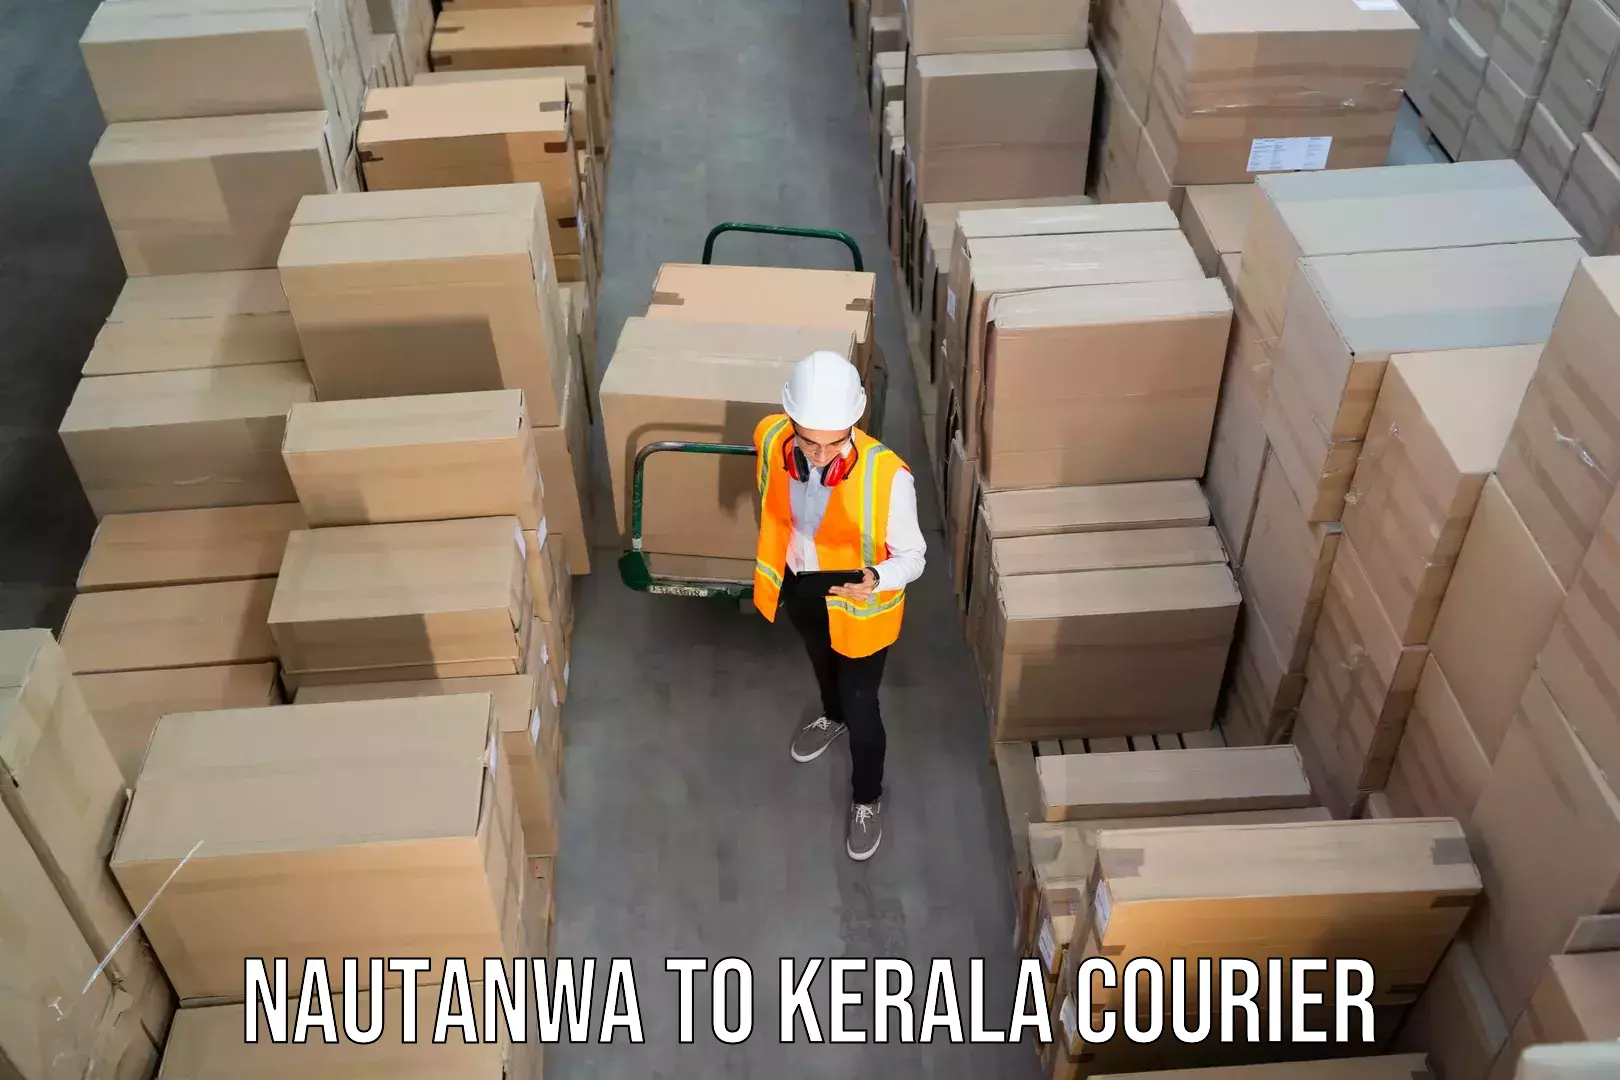 Reliable courier service Nautanwa to Munnar